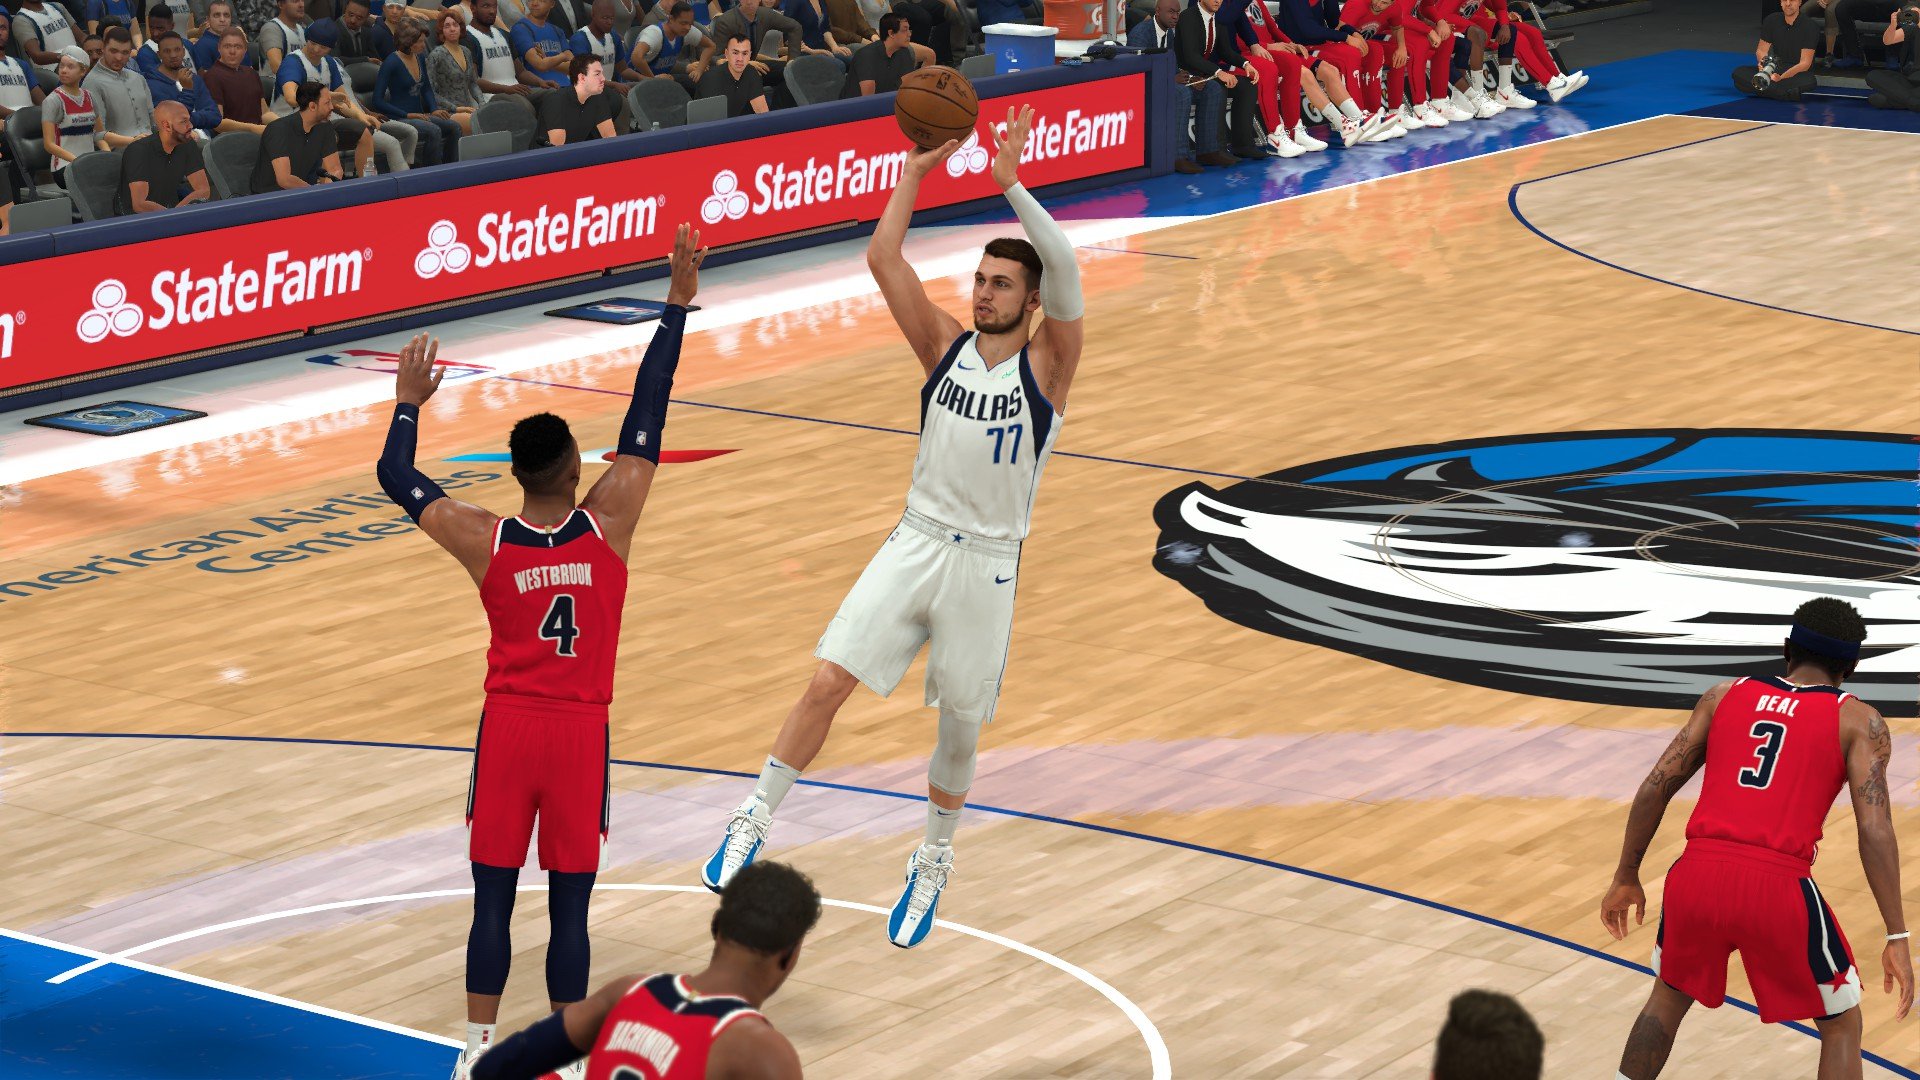 So This Glitch Happened at the All Star Game : r/NBA2k